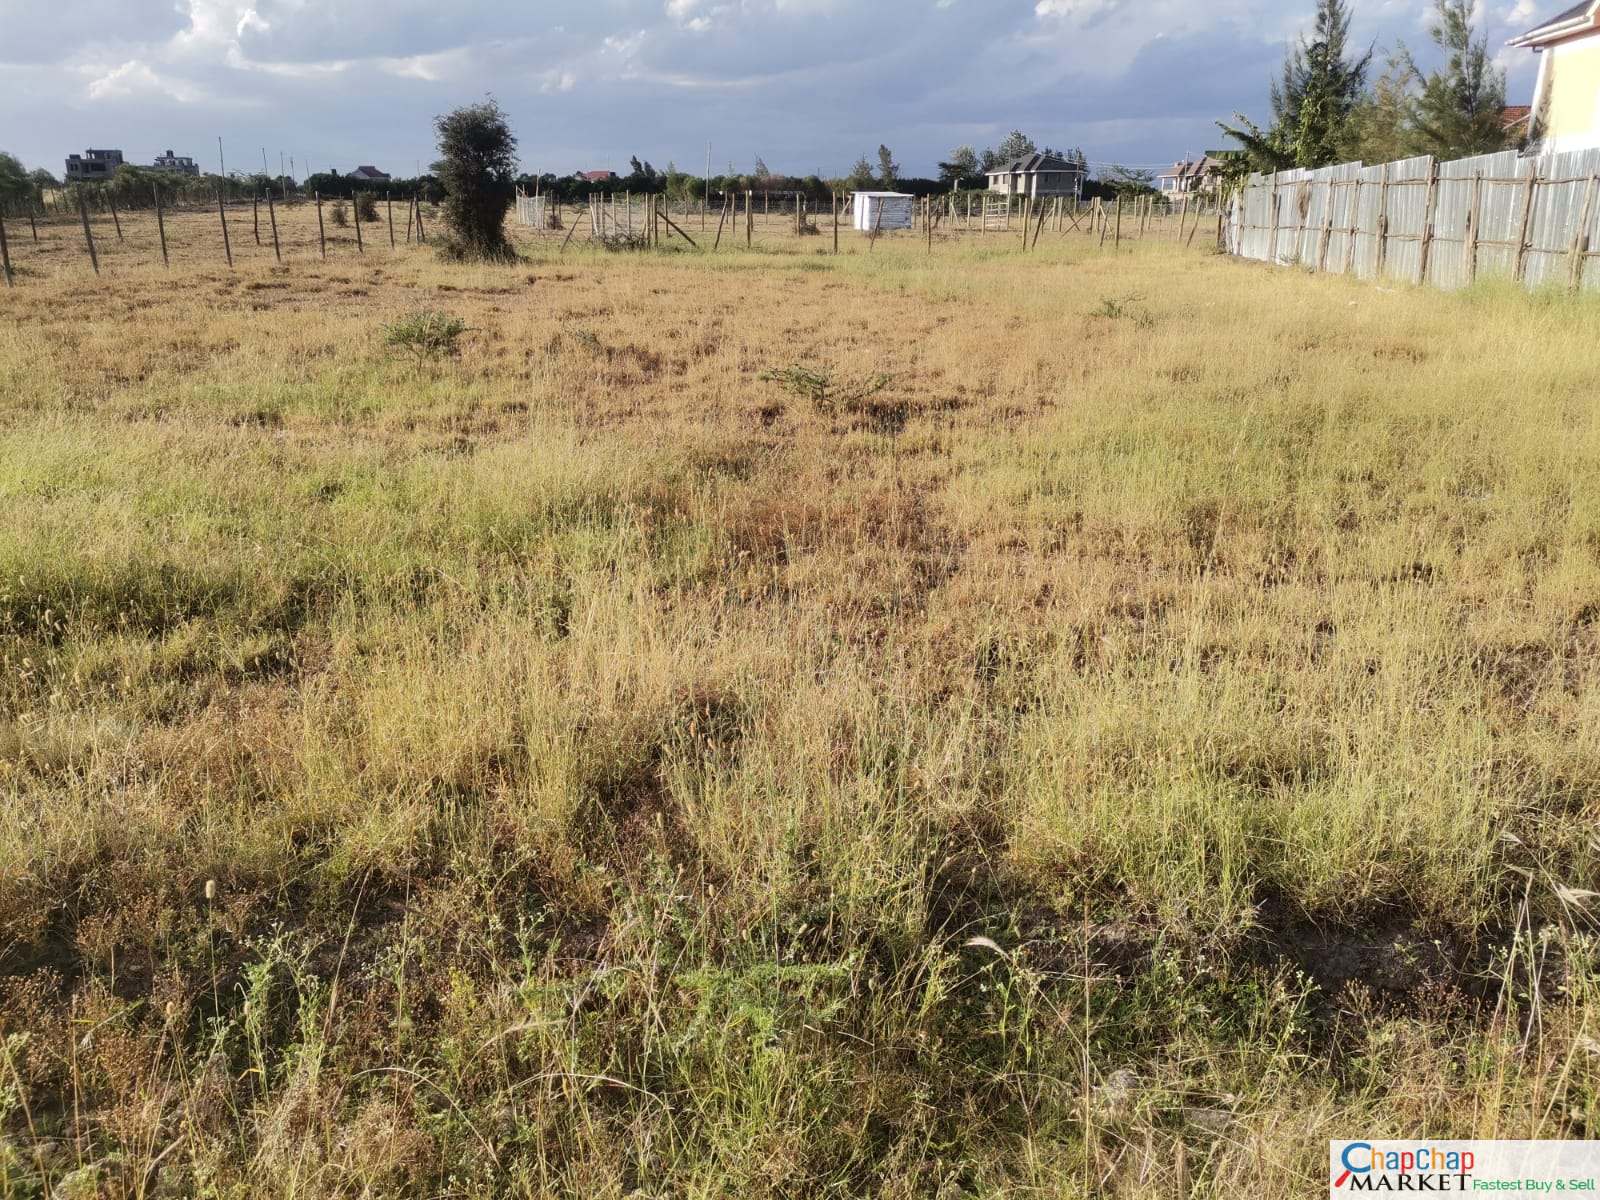 QUICK SALE 1/4 of an acre land for sale in Milimani kitengela